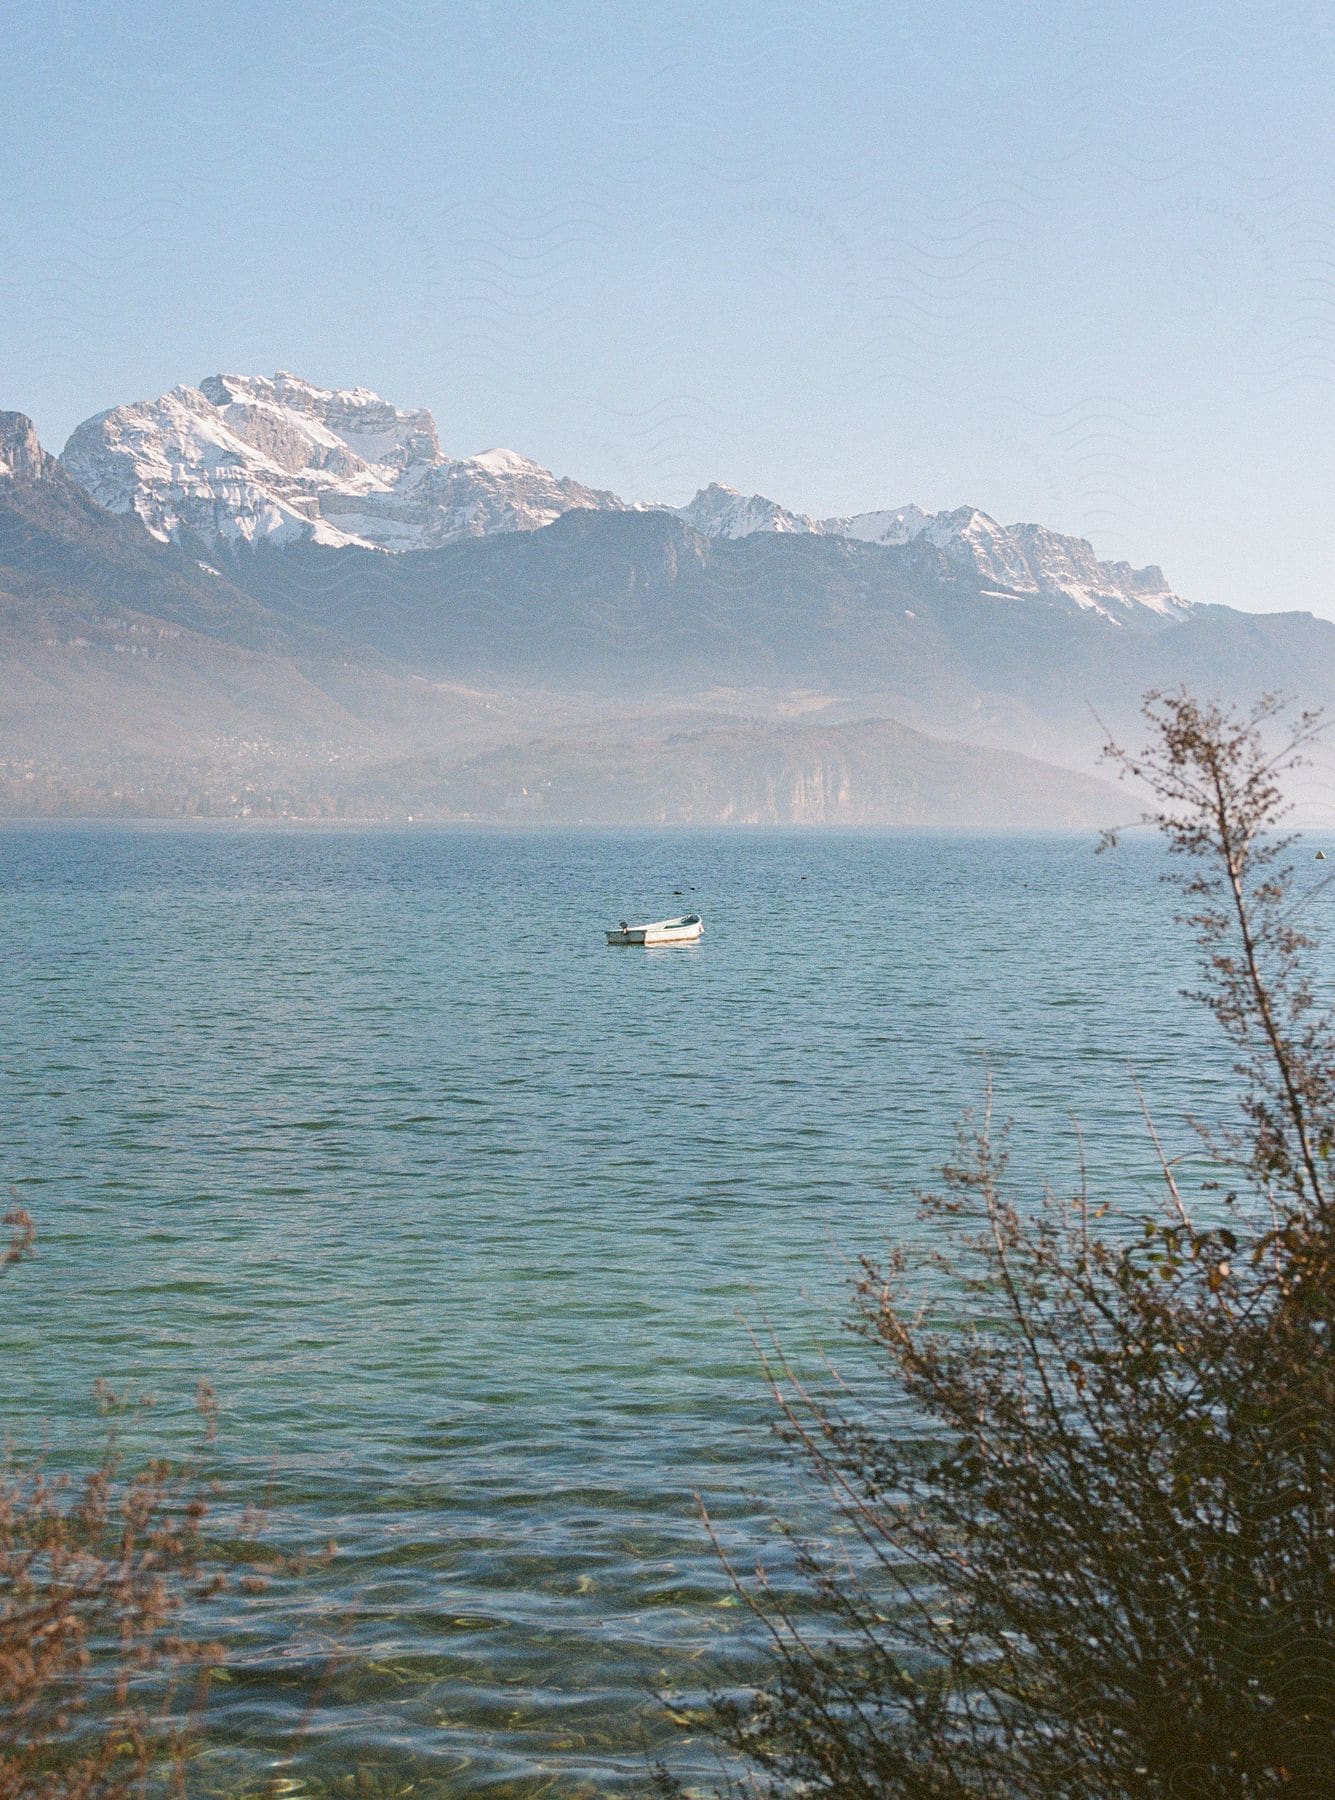 Scenery of a boat in the middle of the sea with a view of rocky mountains with snow on the horizon